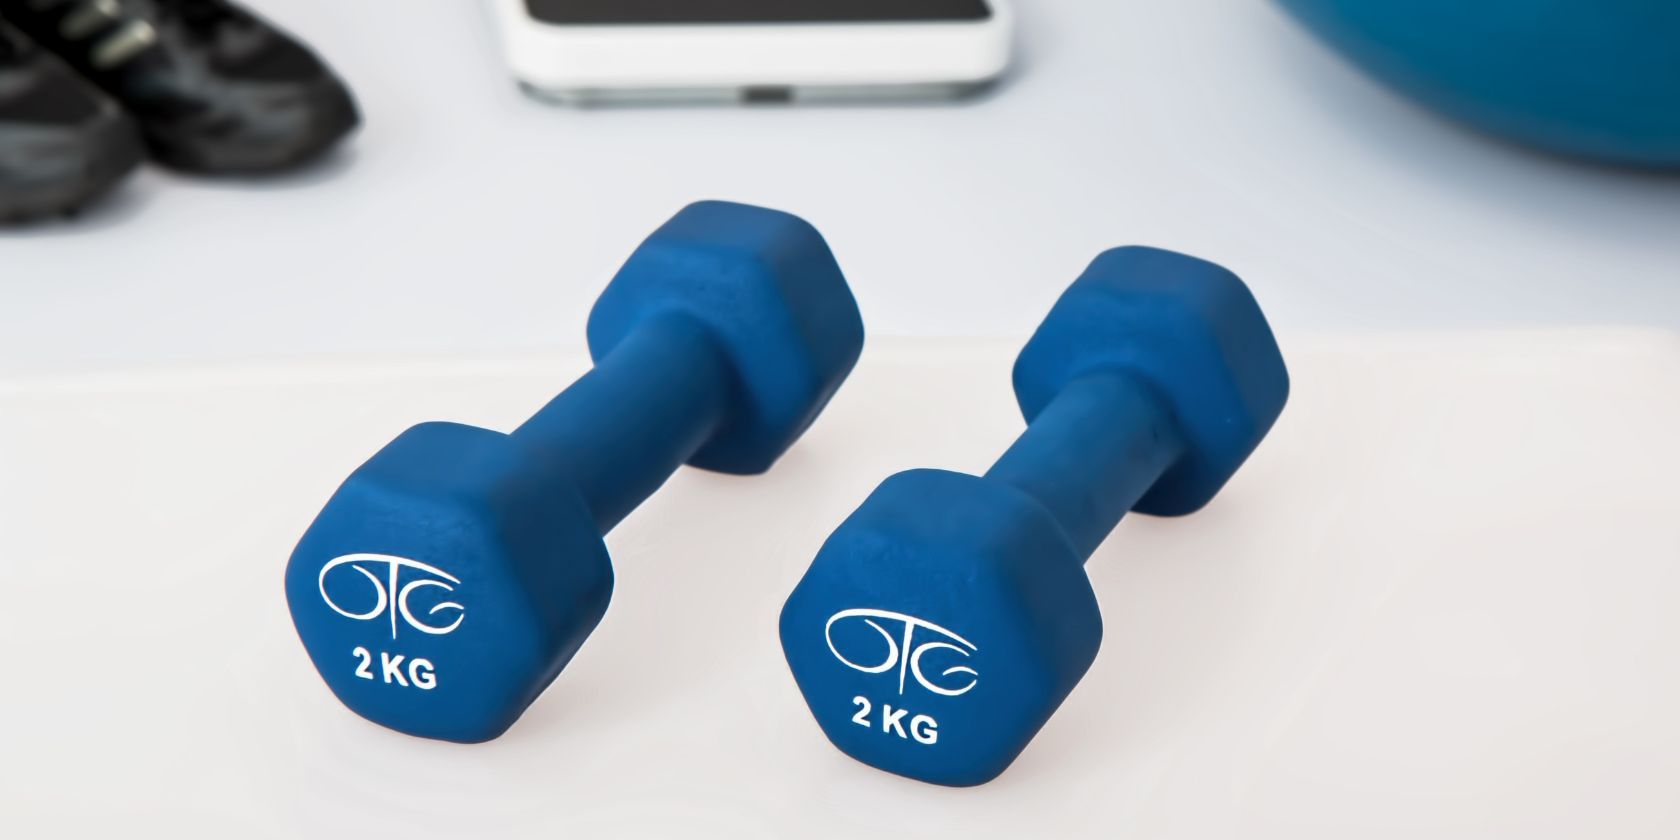 Two blue dumbbells on a white background